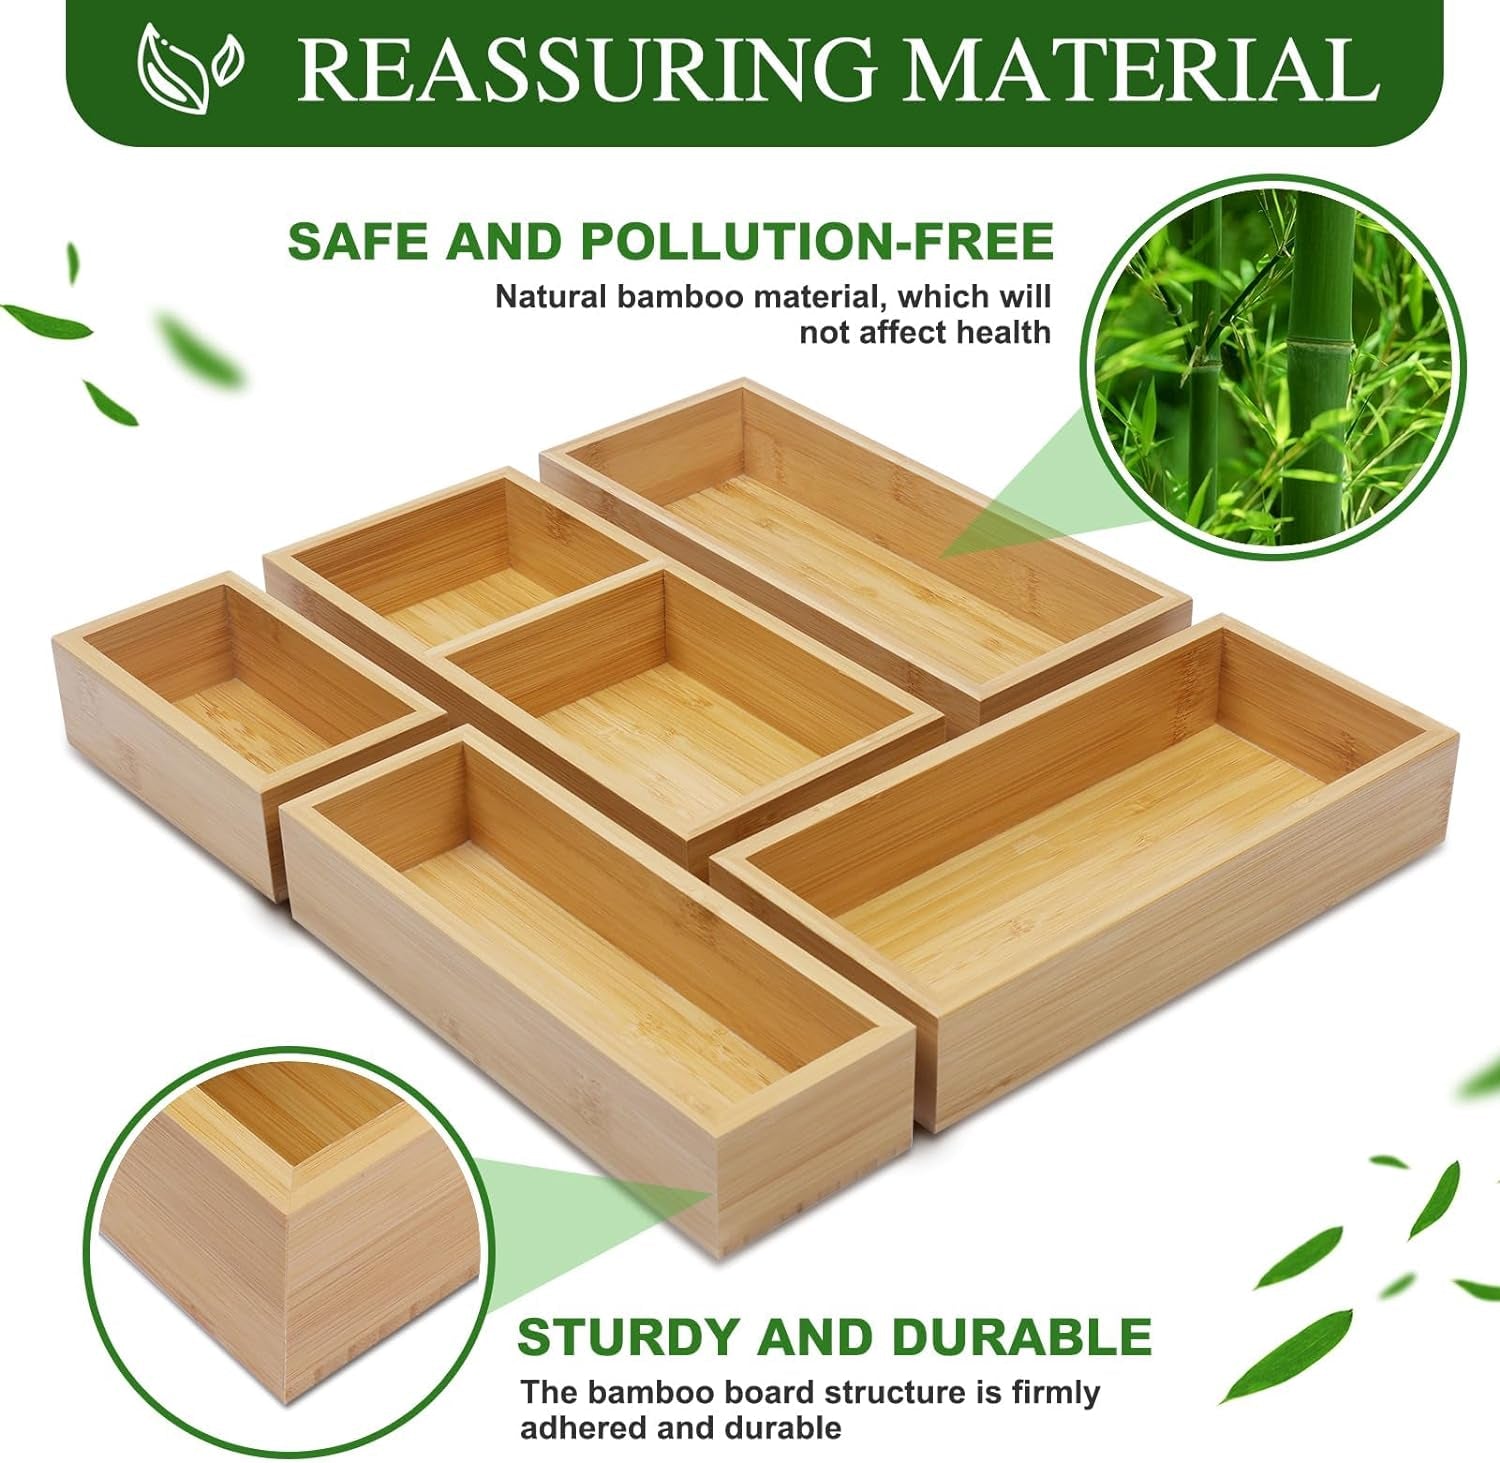 Bamboo Drawer Organizer Box Set, 5 PCS Multi-Use Individual Wood Storage Containers, Junk Drawer Divider Organizers and Storage Trays for Kitchen, Bathroom, Office Desk, Makeup, Jewelry, Utensils